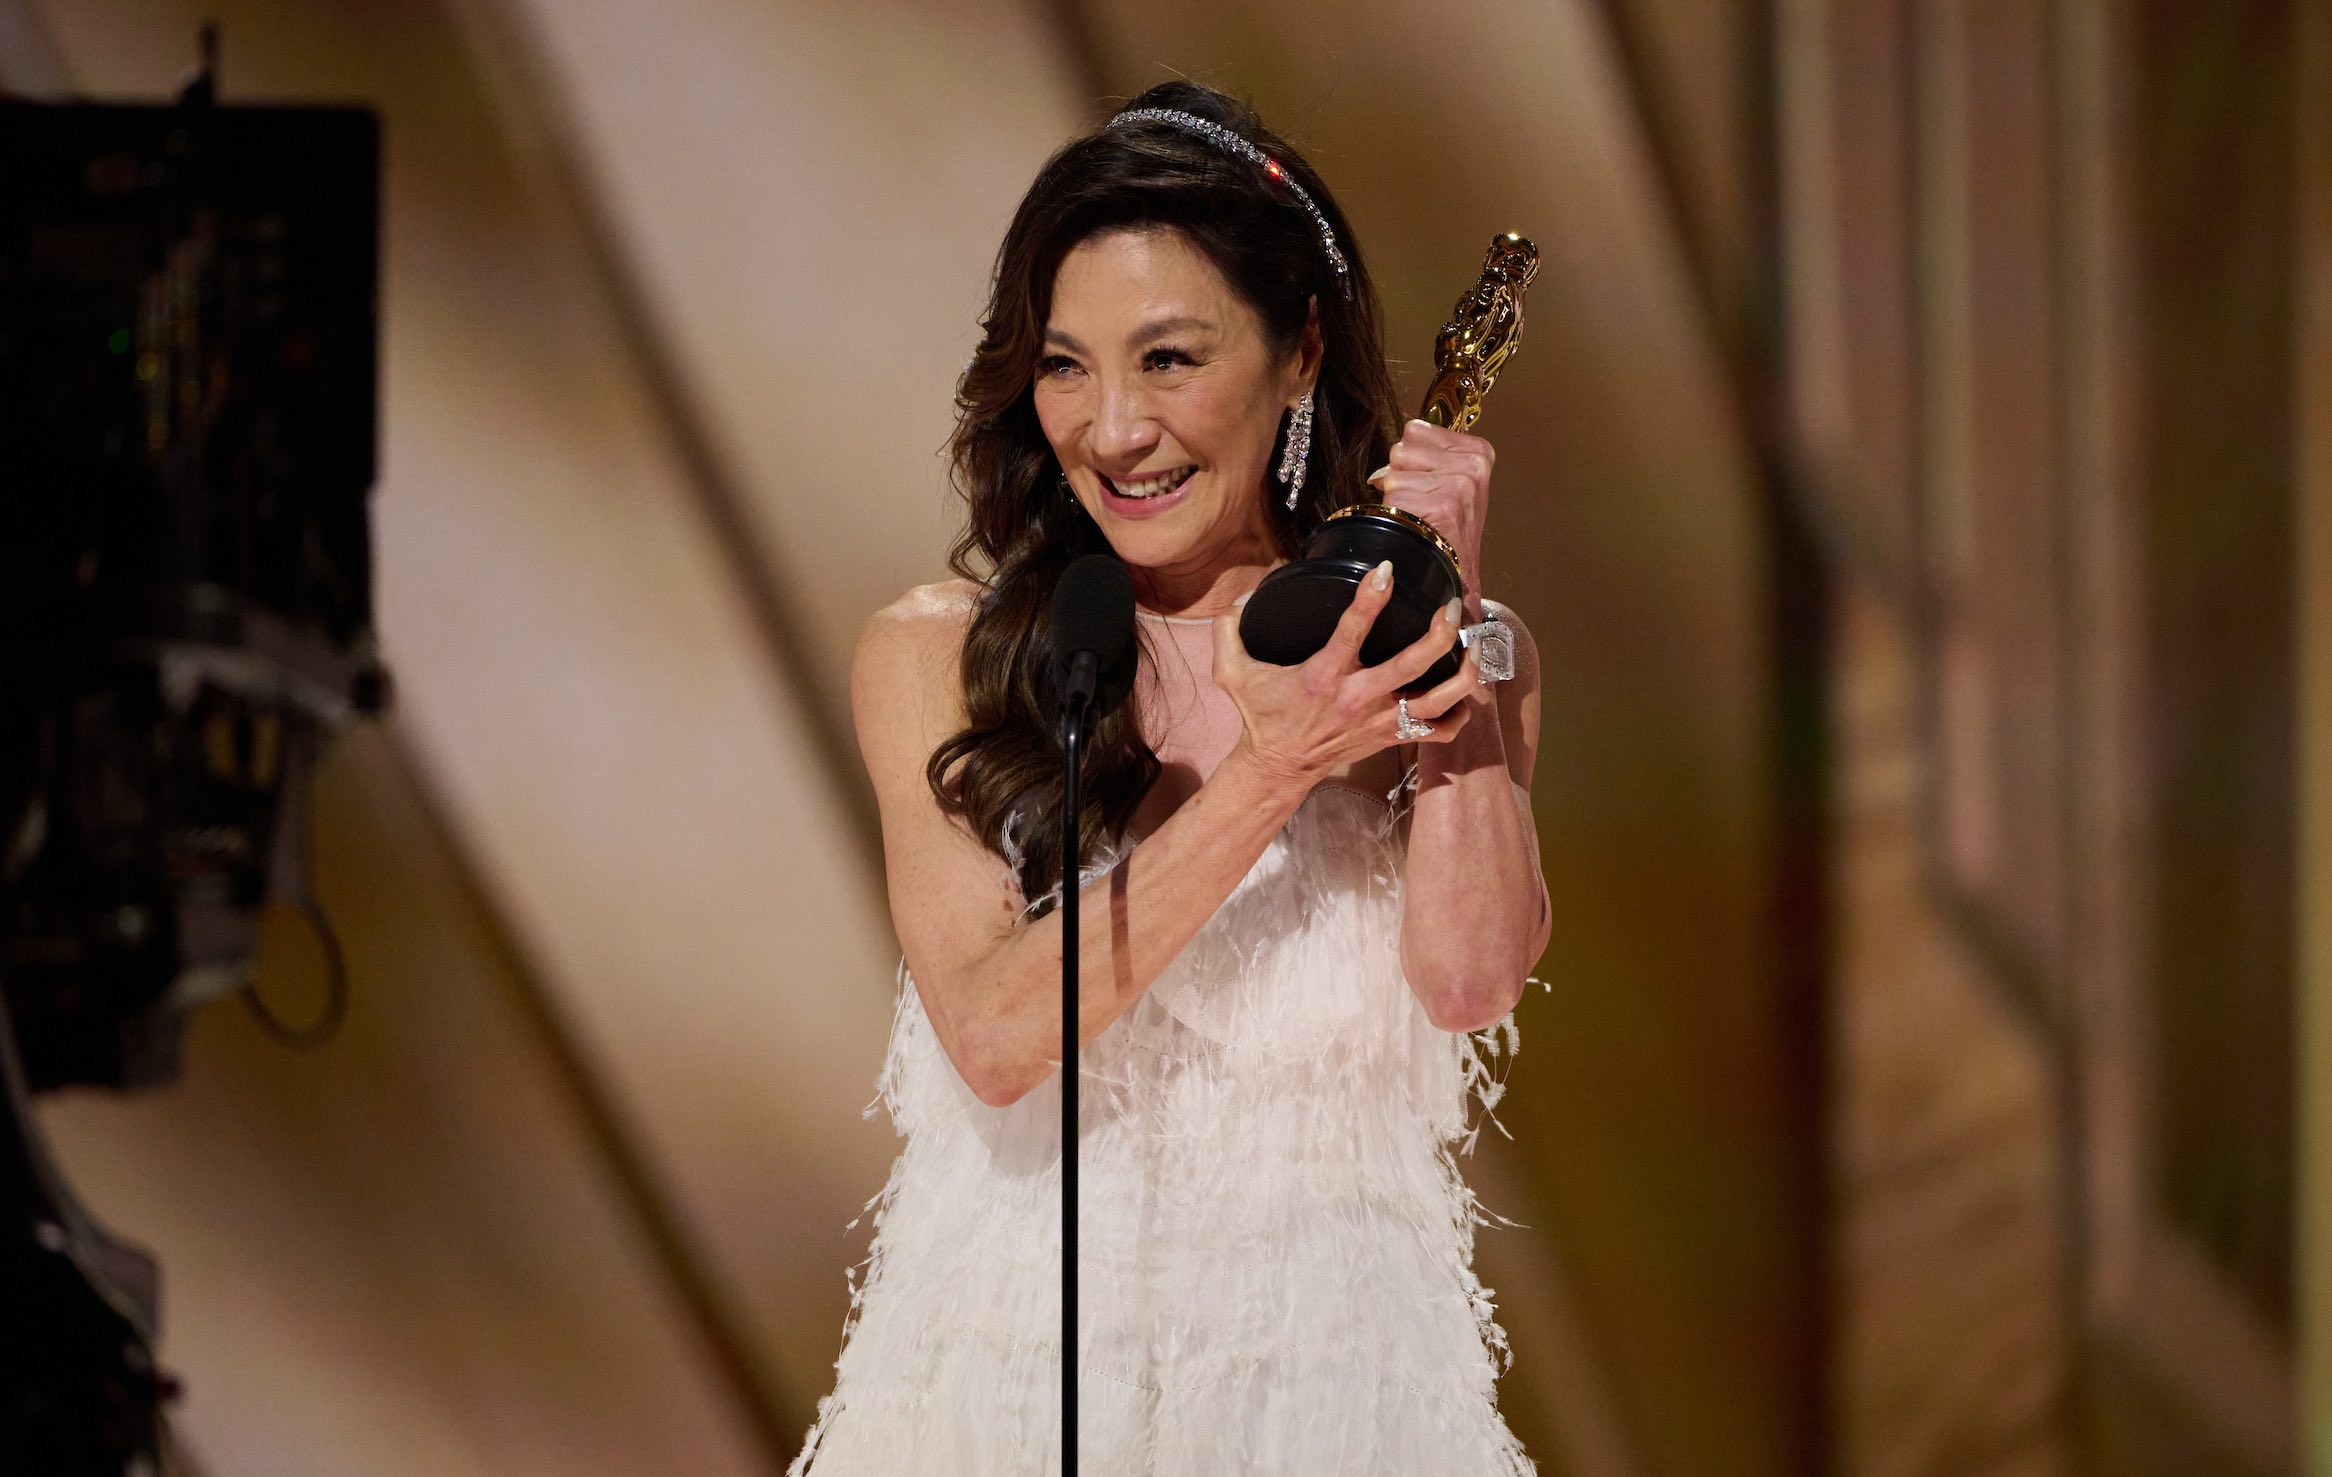 History is made at night: Yeoh, born in Malaysia, is the first Asian performer to win a Best Actress in a Leading Role Oscar. / Photo by Blaine Ohigashi, courtesy of ©A.M.P.A.S.